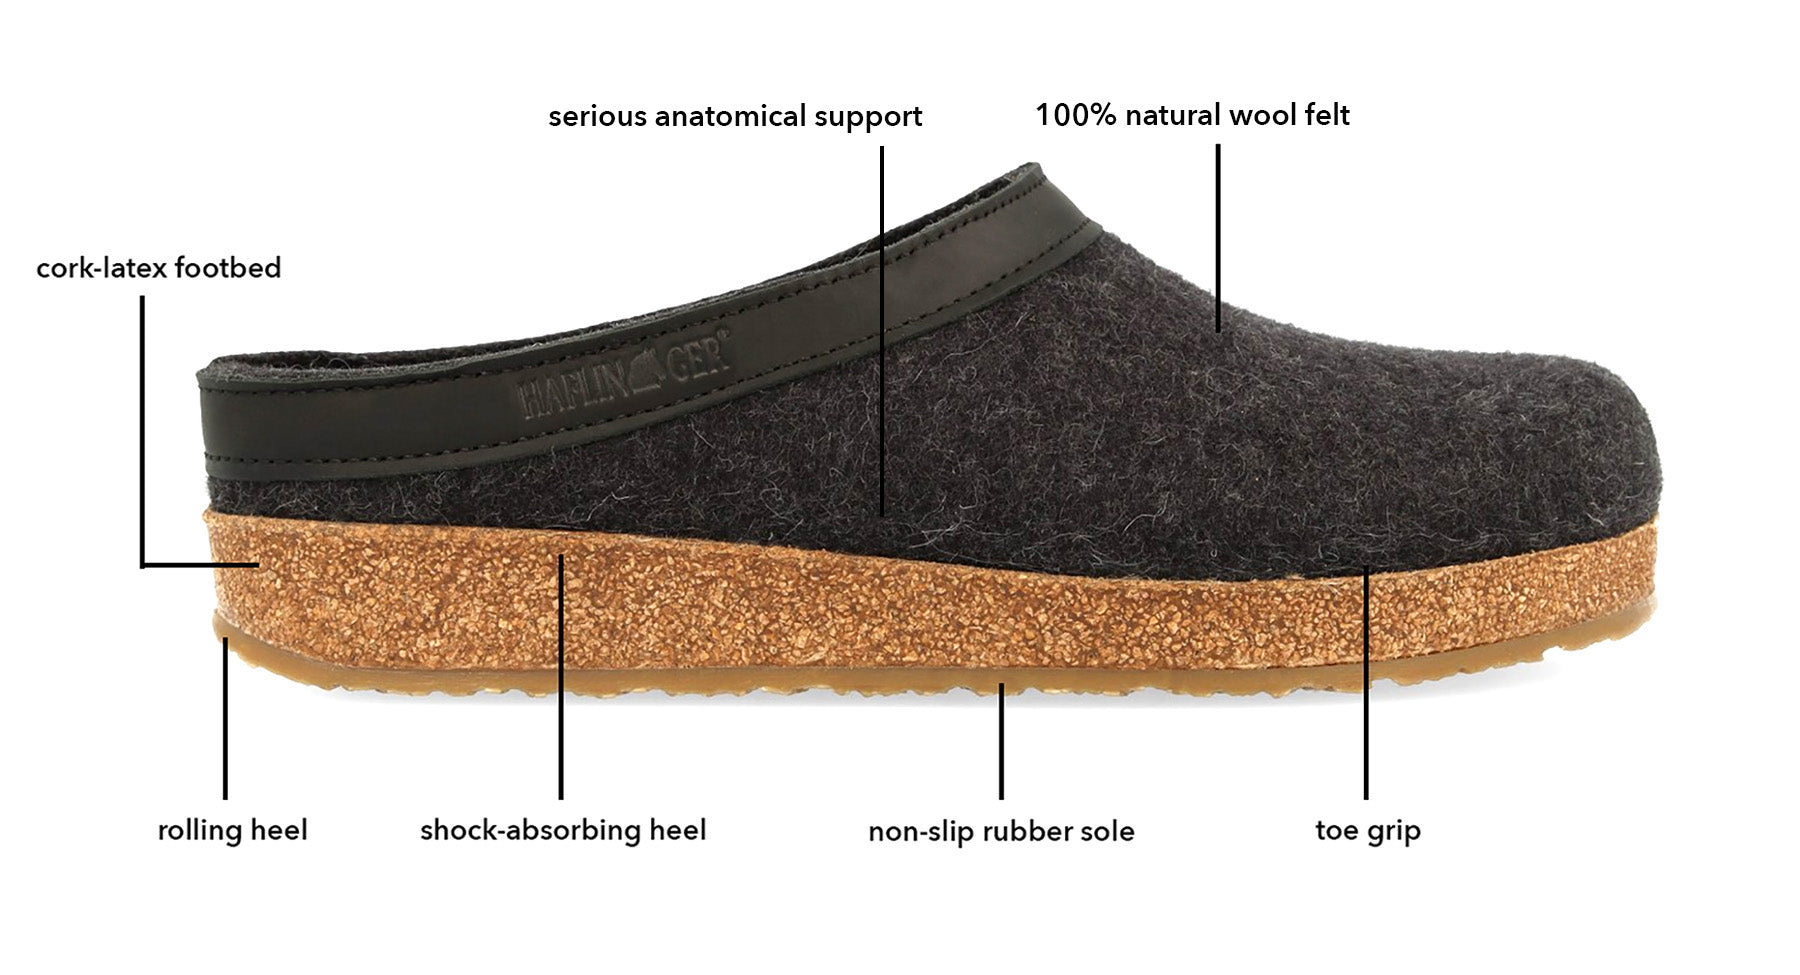 Haflinger Footbed - Made from premium natural materials and meticulous European craftsmanship. 100% virgin wool, cork latex footbeds, vegetable-tanned leathers and linings. - Haflinger Canada